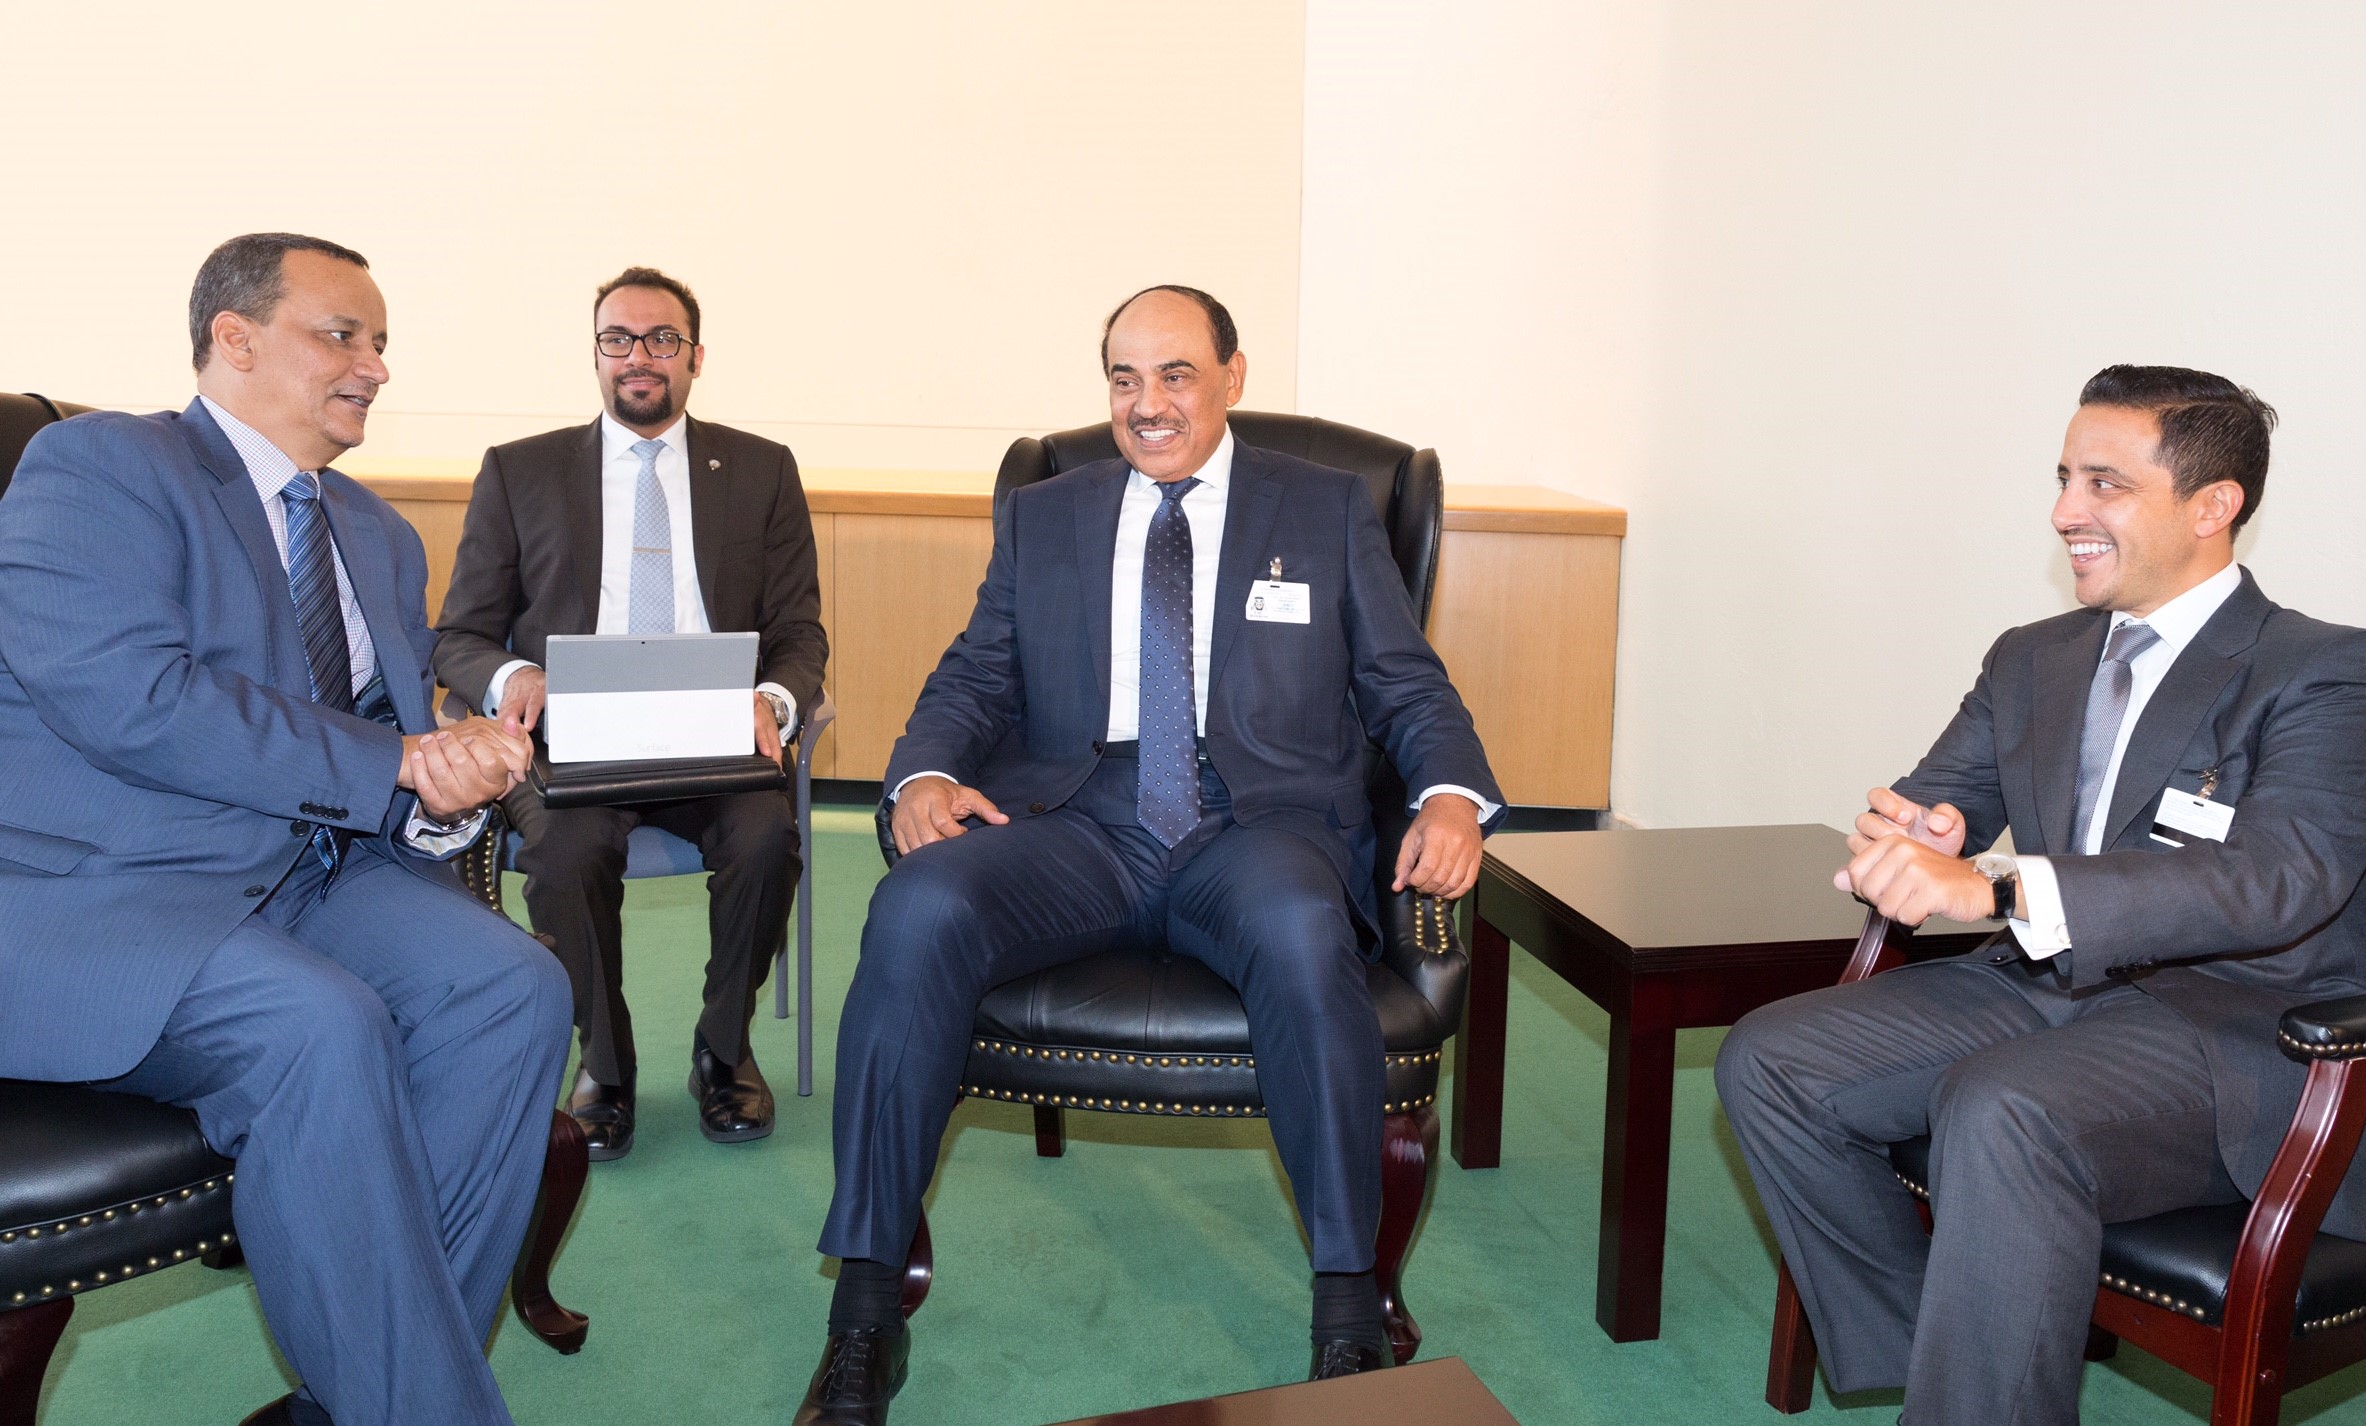 Kuwait's First Deputy Prime Minister and Foreign Minister Sheikh Sabah Khaled Al-Hamad Al-Sabah during a meeting with UN Special envoy to Yemen Ismail Ould Sheikh Ahmad